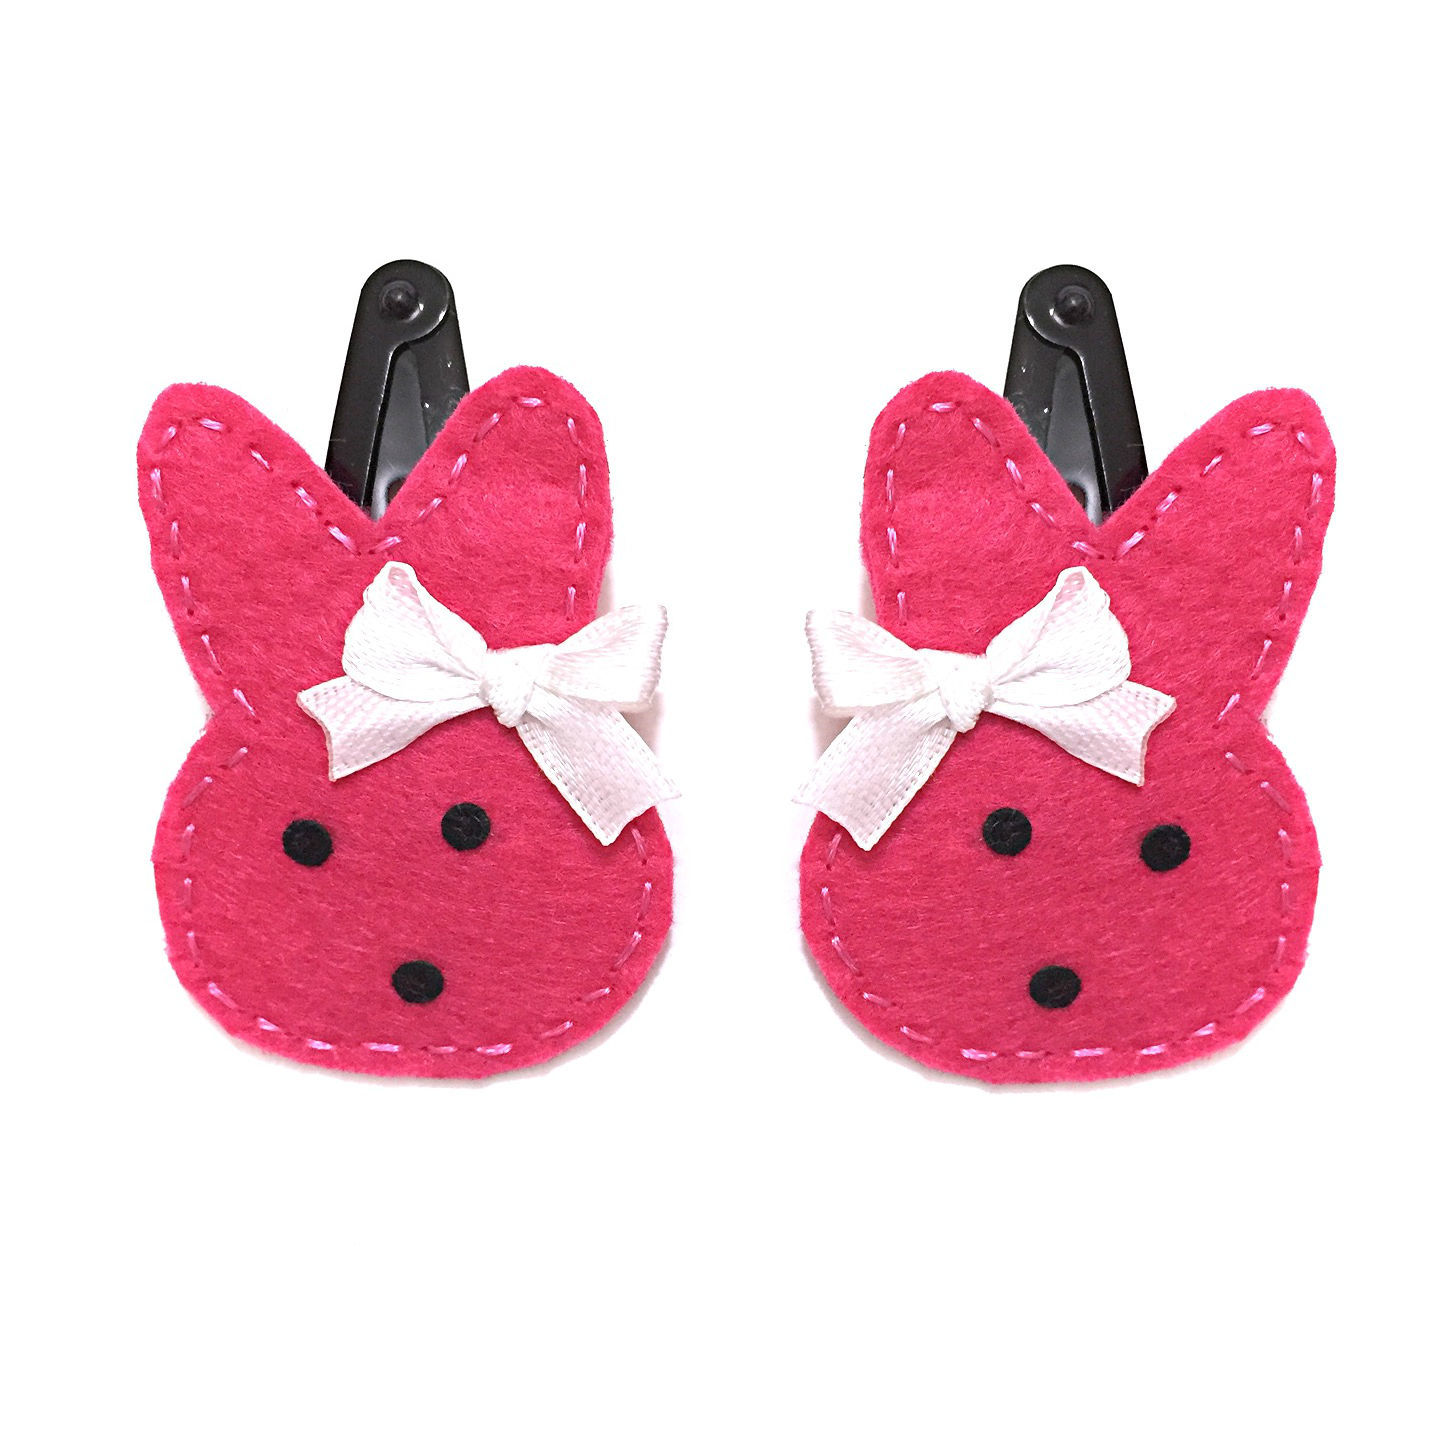 Hair Clip - Pink Kitty Set of 2